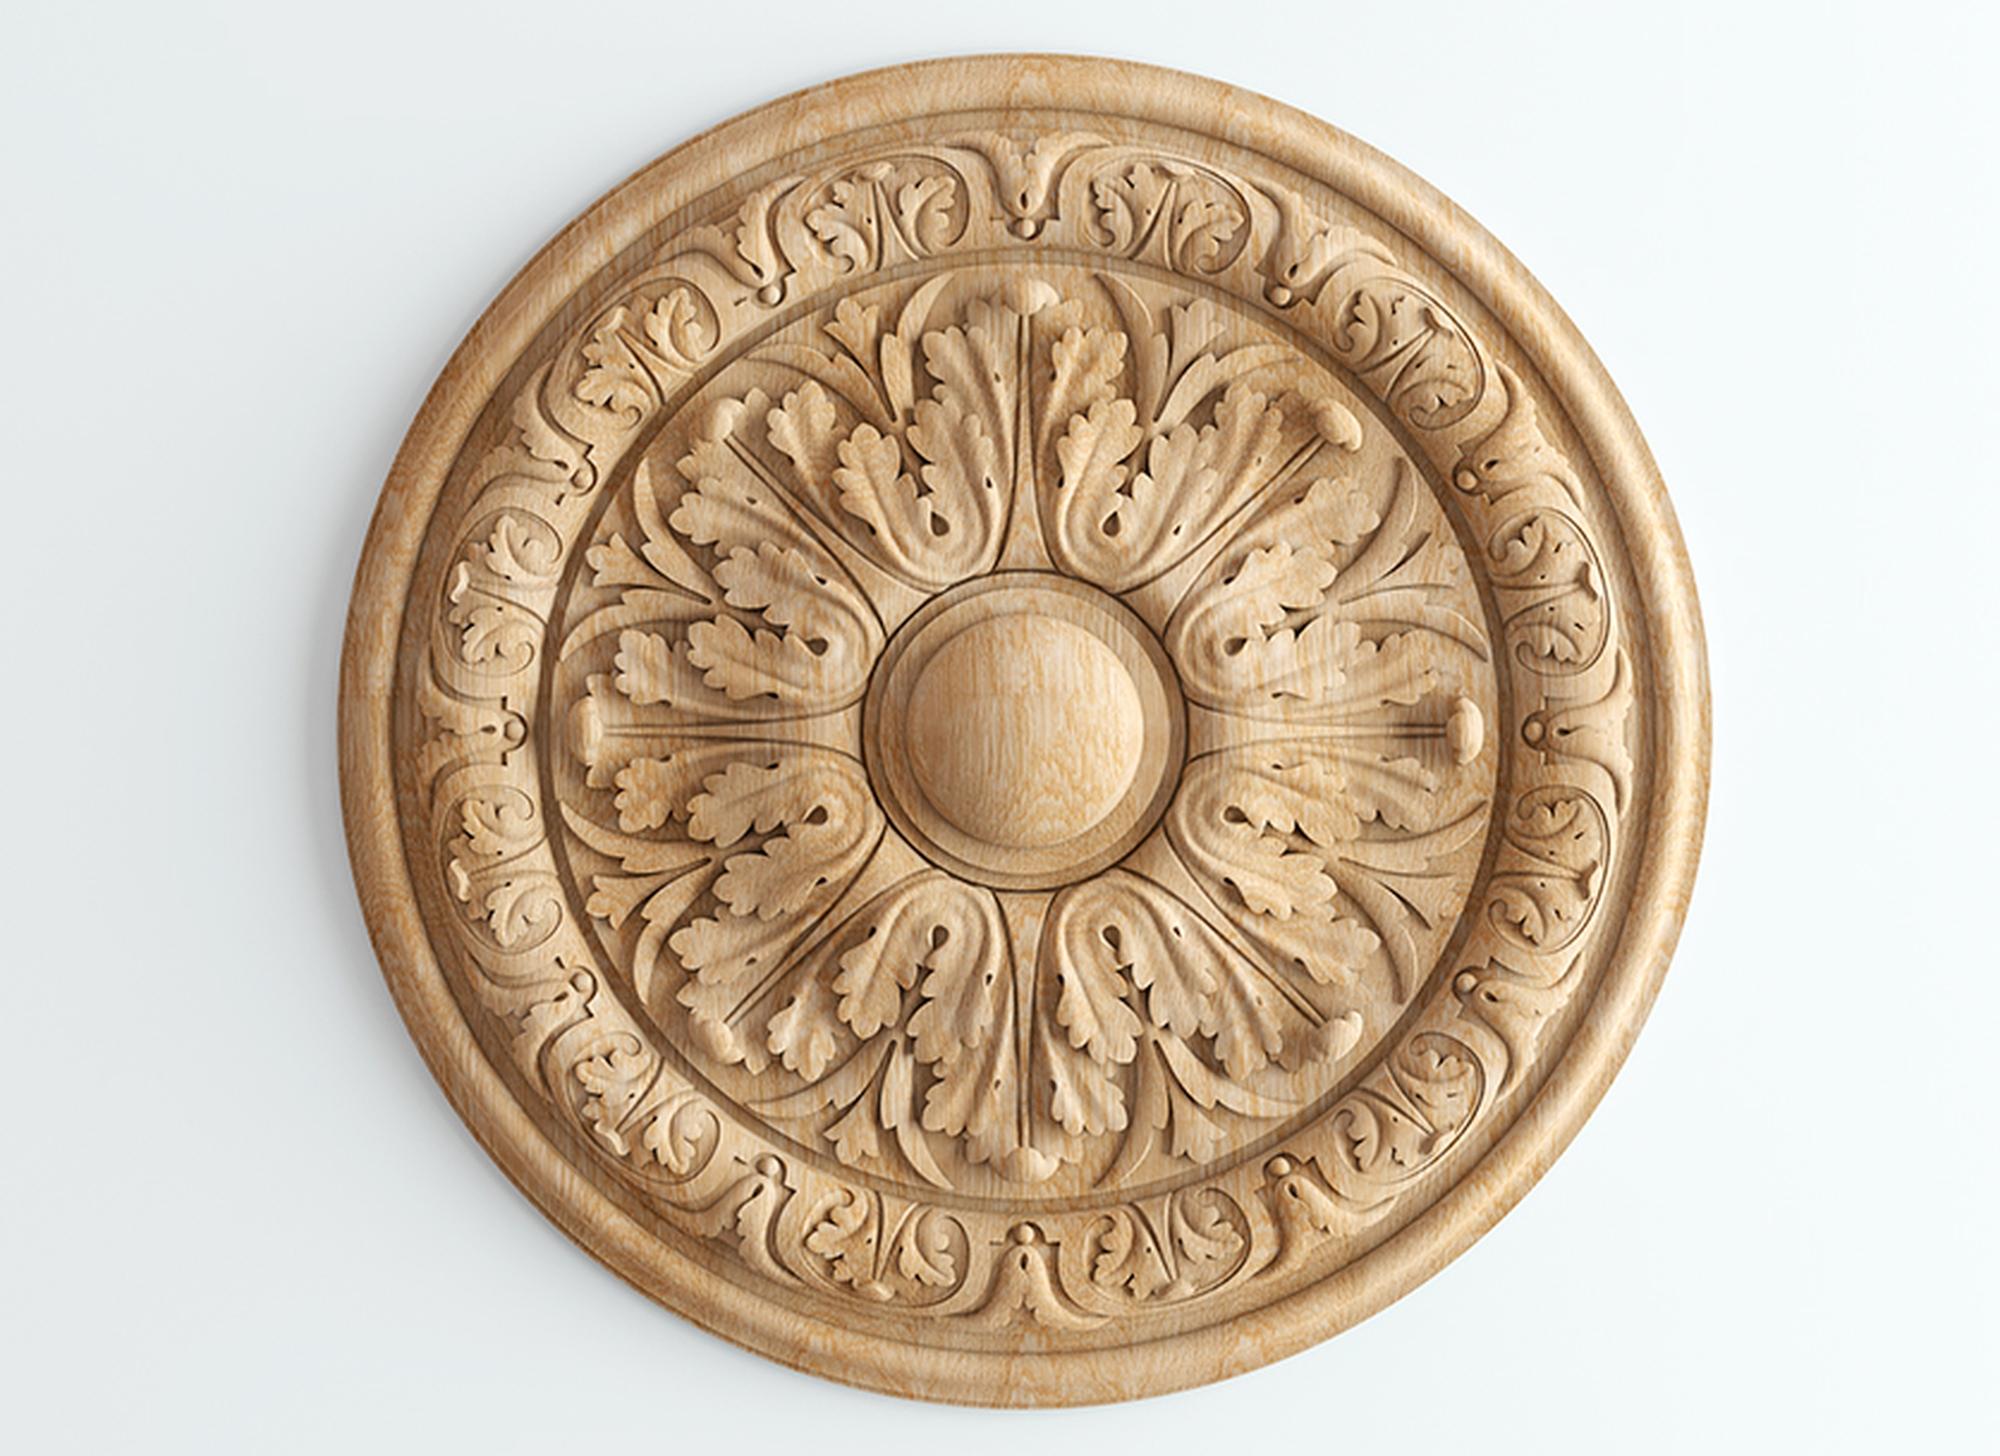 High-quality hand carved wood rosettes from oak or beech of your choice.

>> SKU: R-049

>> Dimensions (A x B x C):

1) 13.78